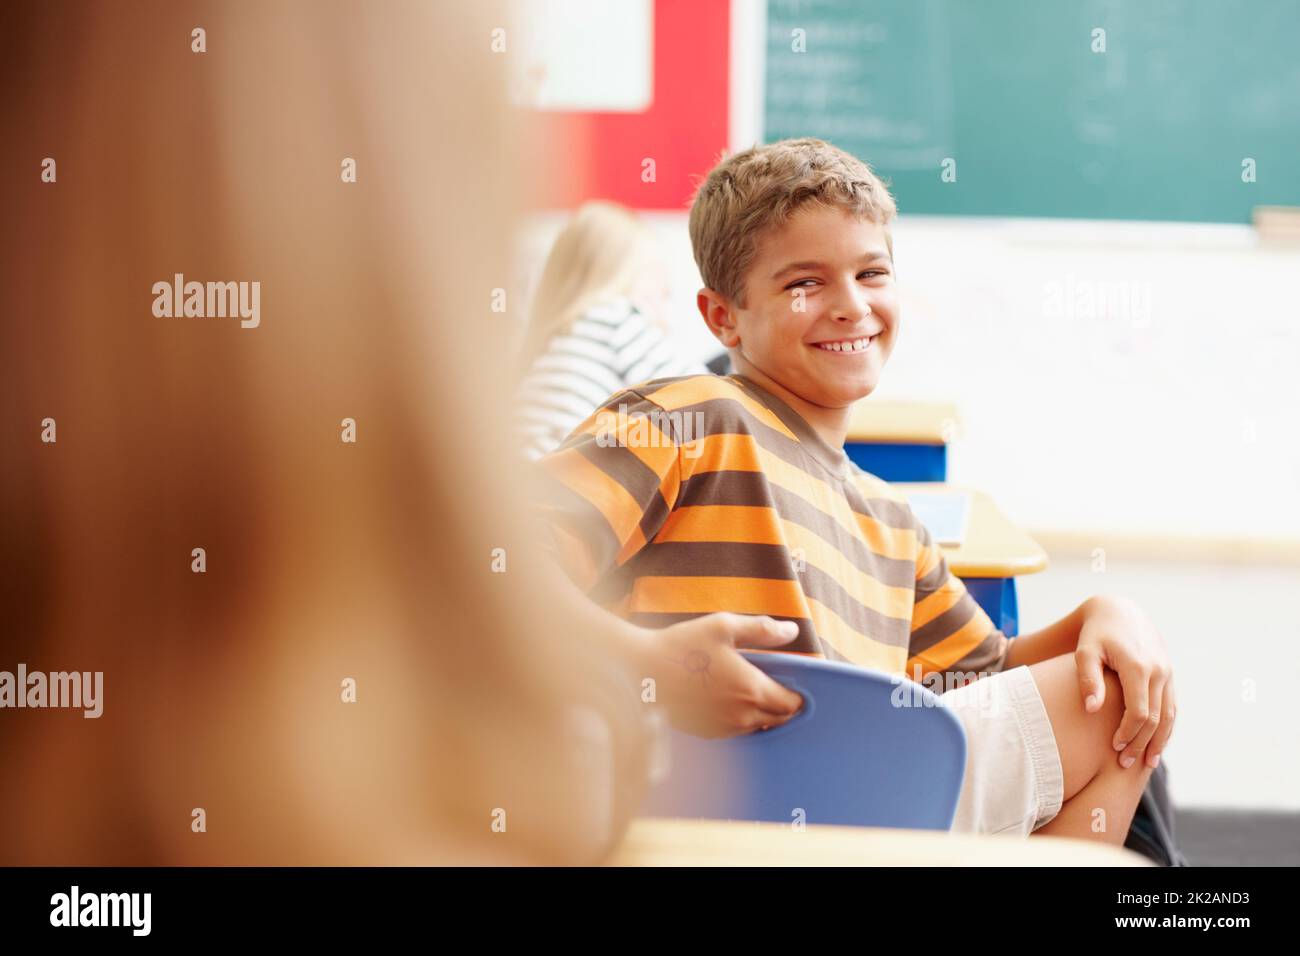 Get the attention of the cool kid in class. Smiling young boy turning round in class to look at a classmate - copyspace. Stock Photo